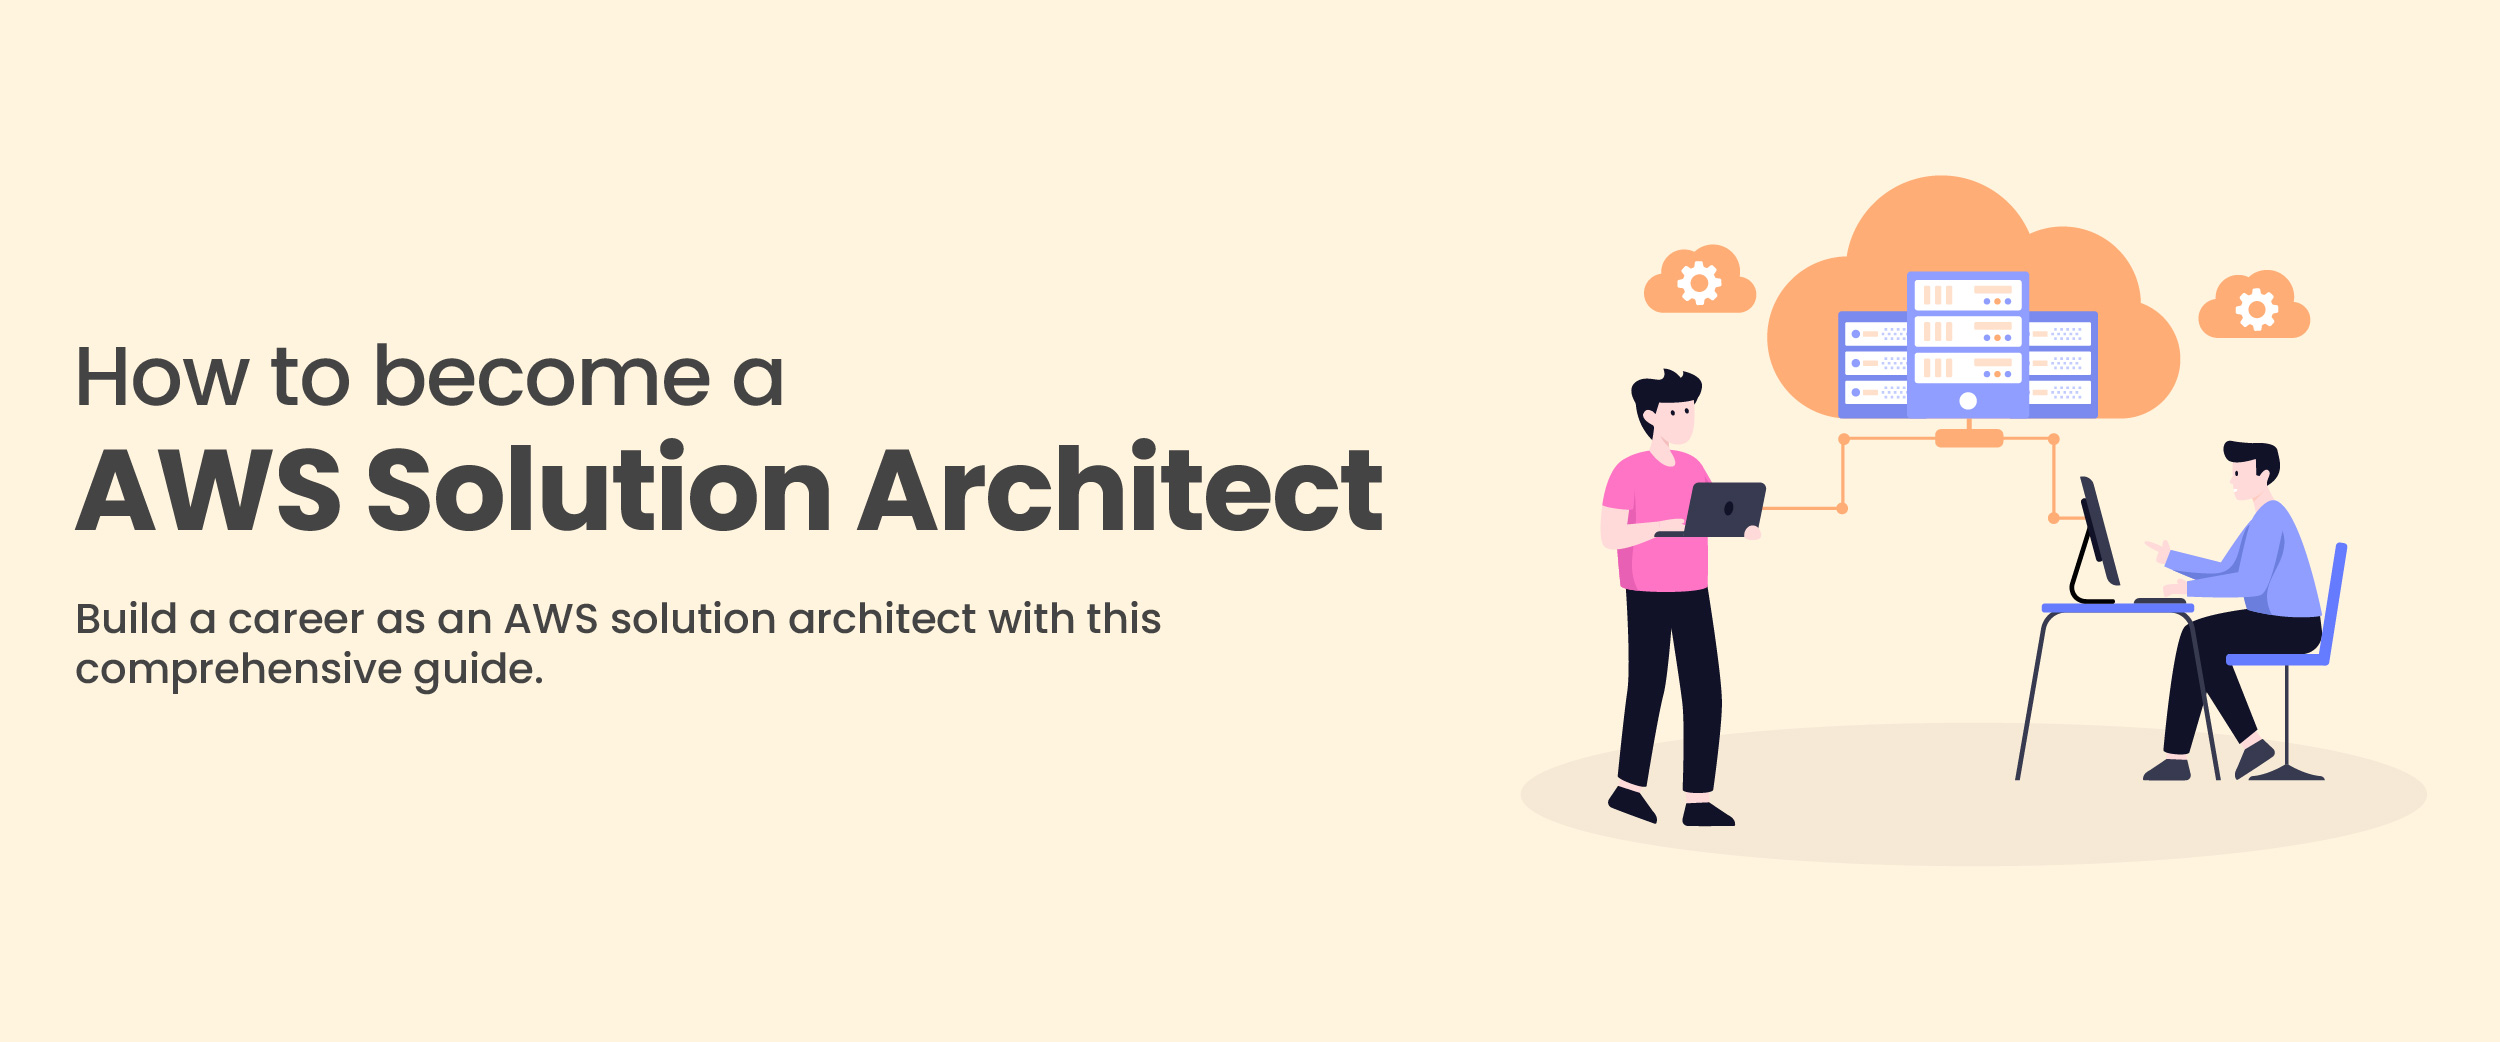 How to become a aws solution architect